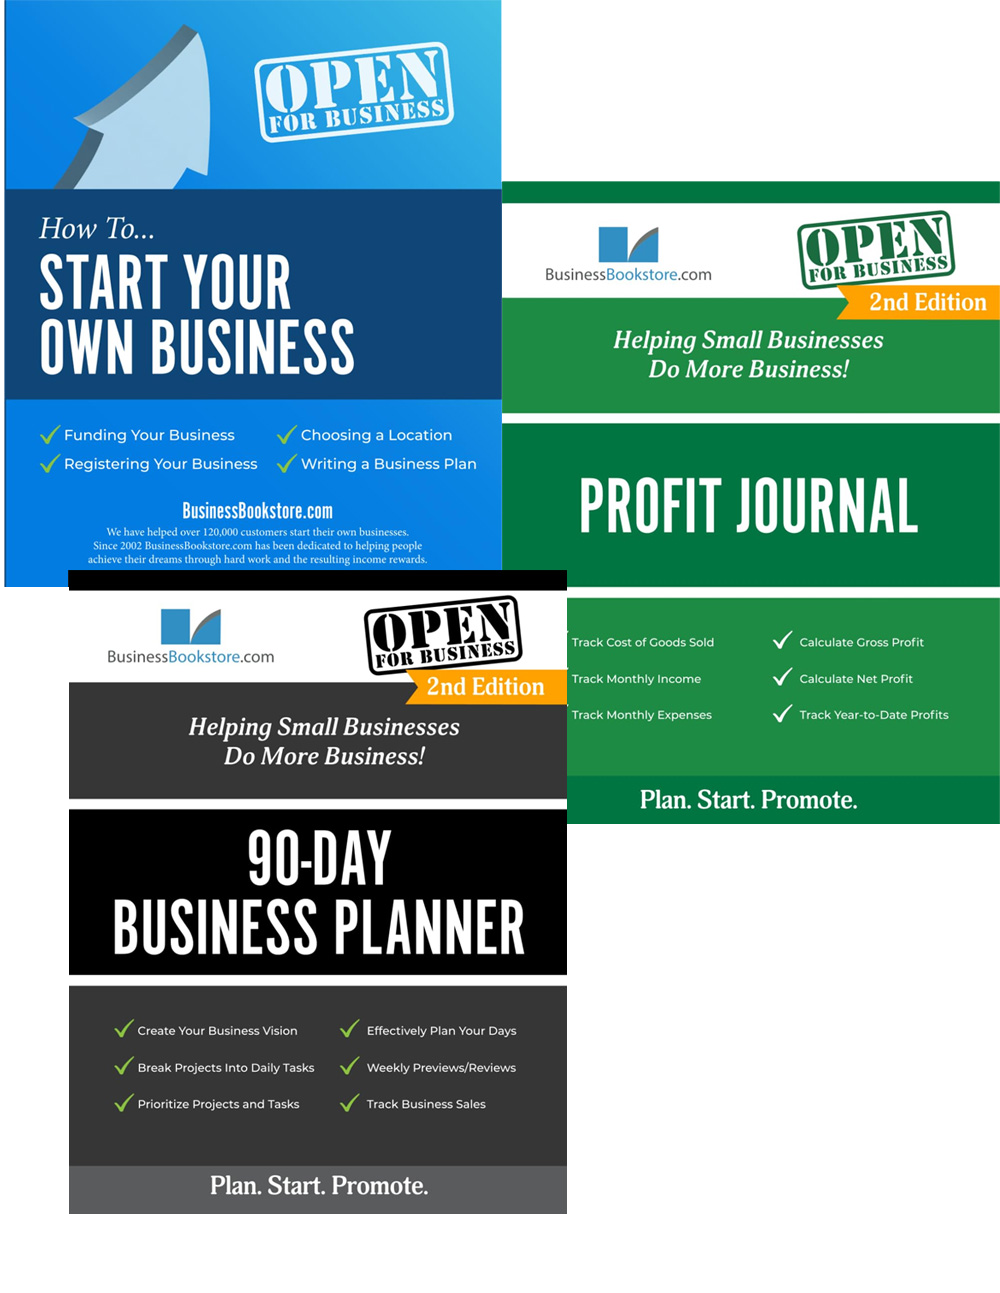 Business Startup Kit: From Vision to Profit